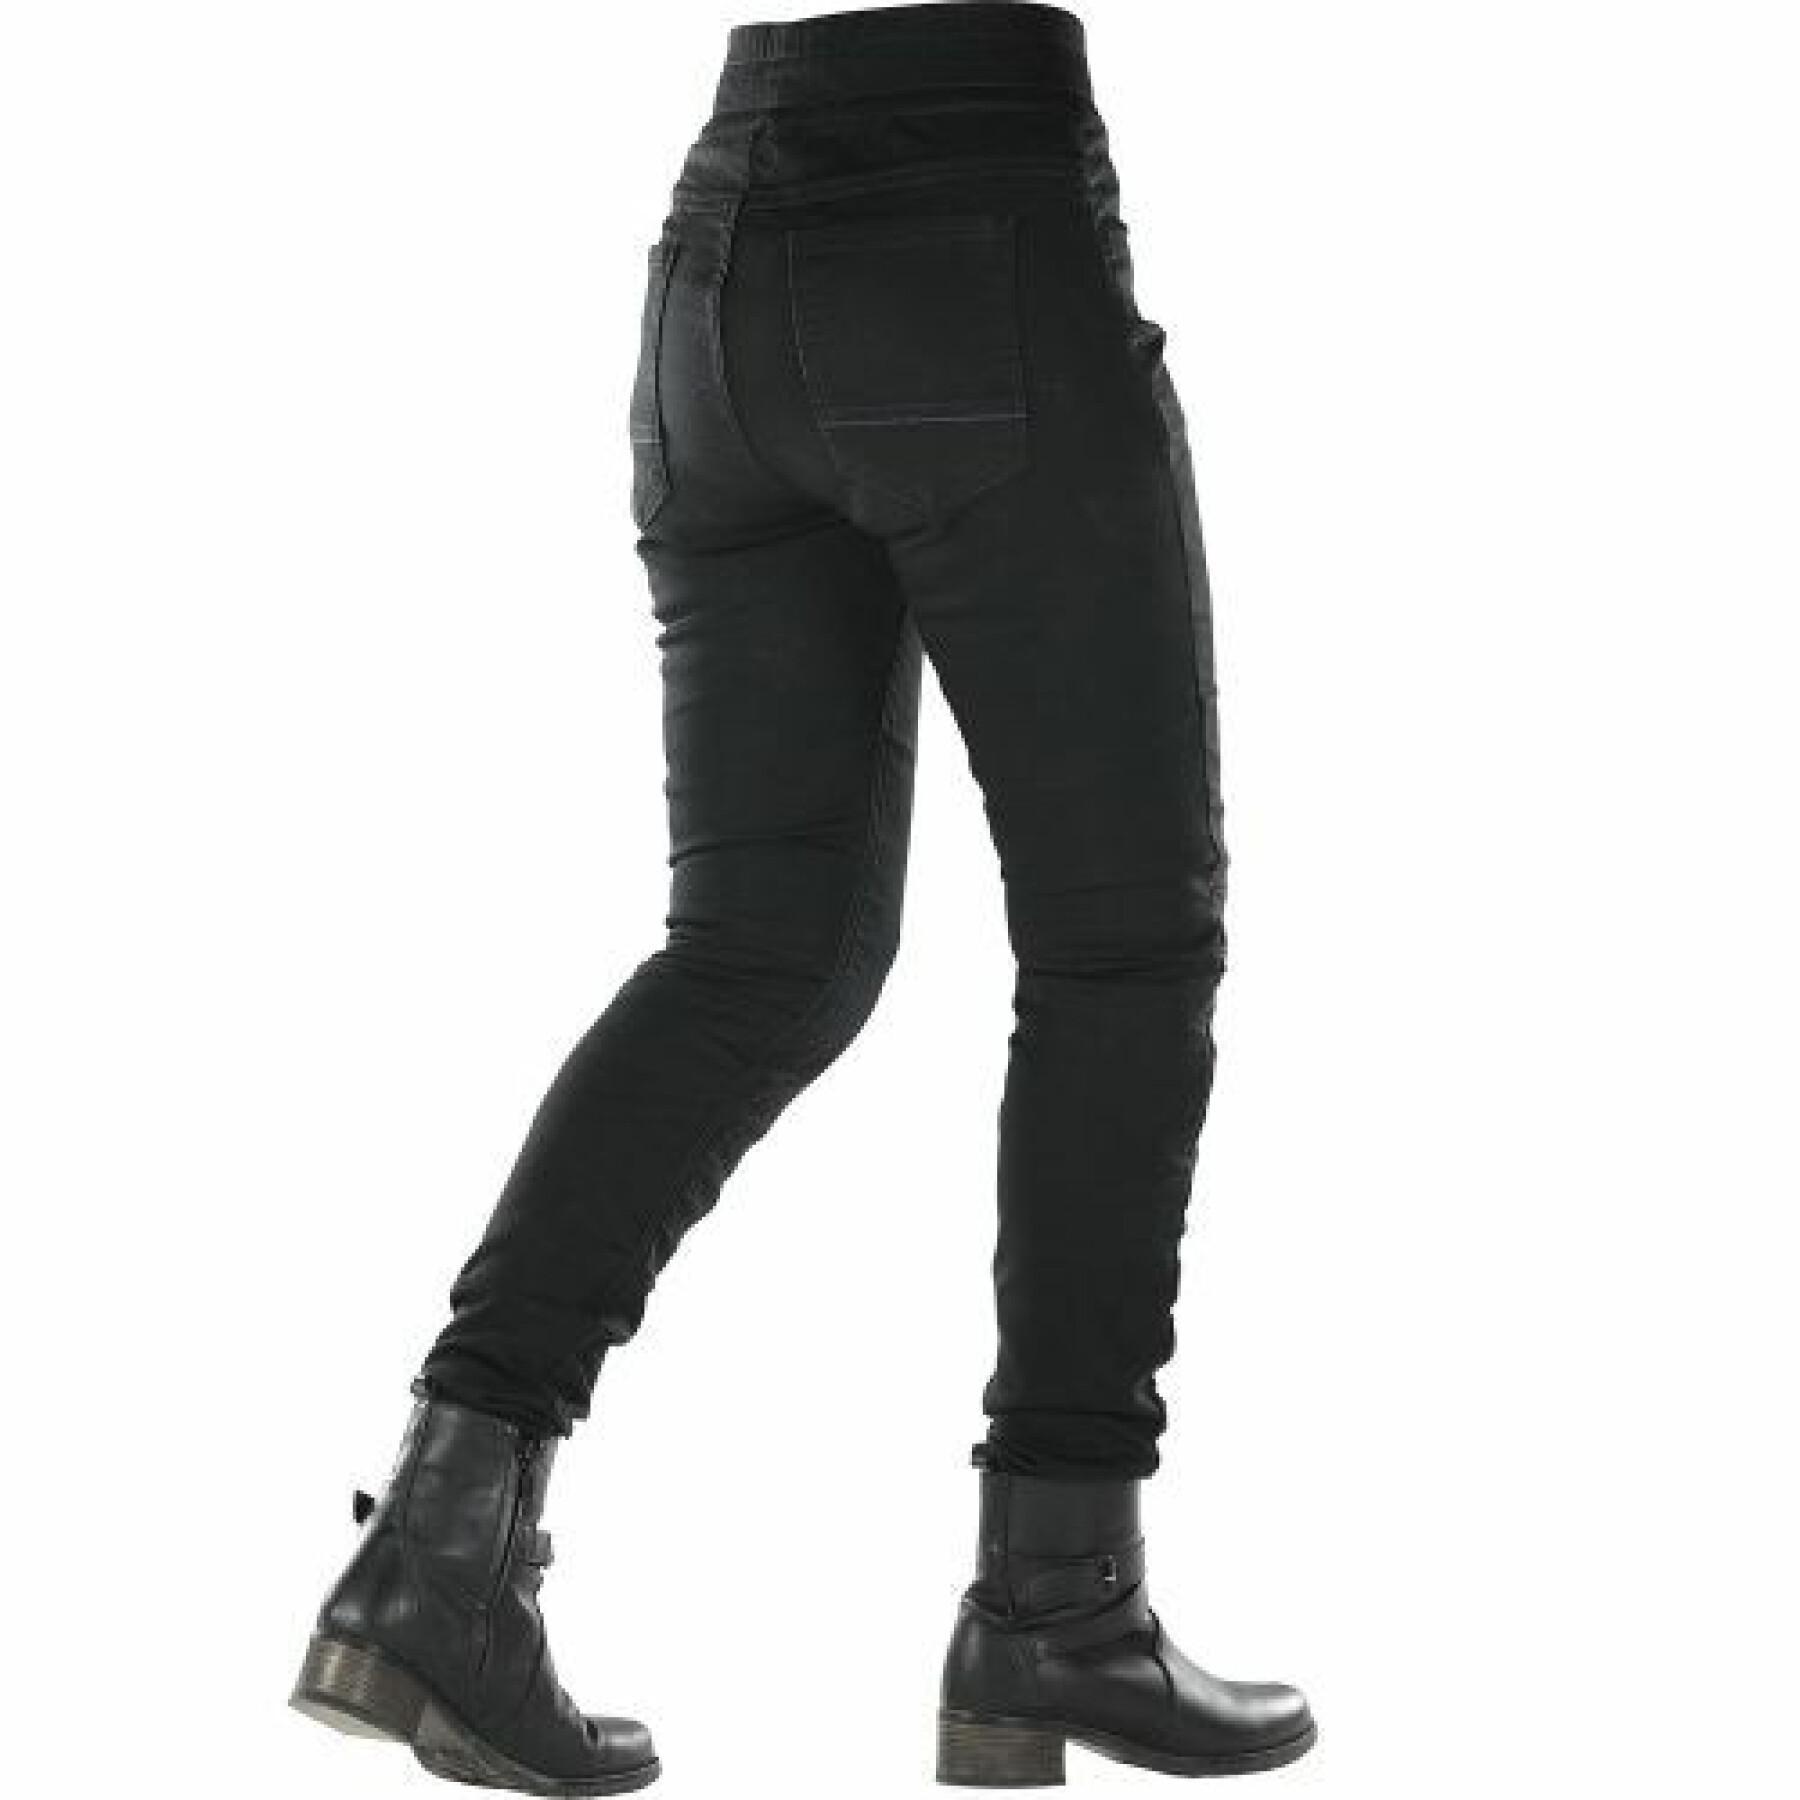 Motorcycle jeans woman Overlap Jane